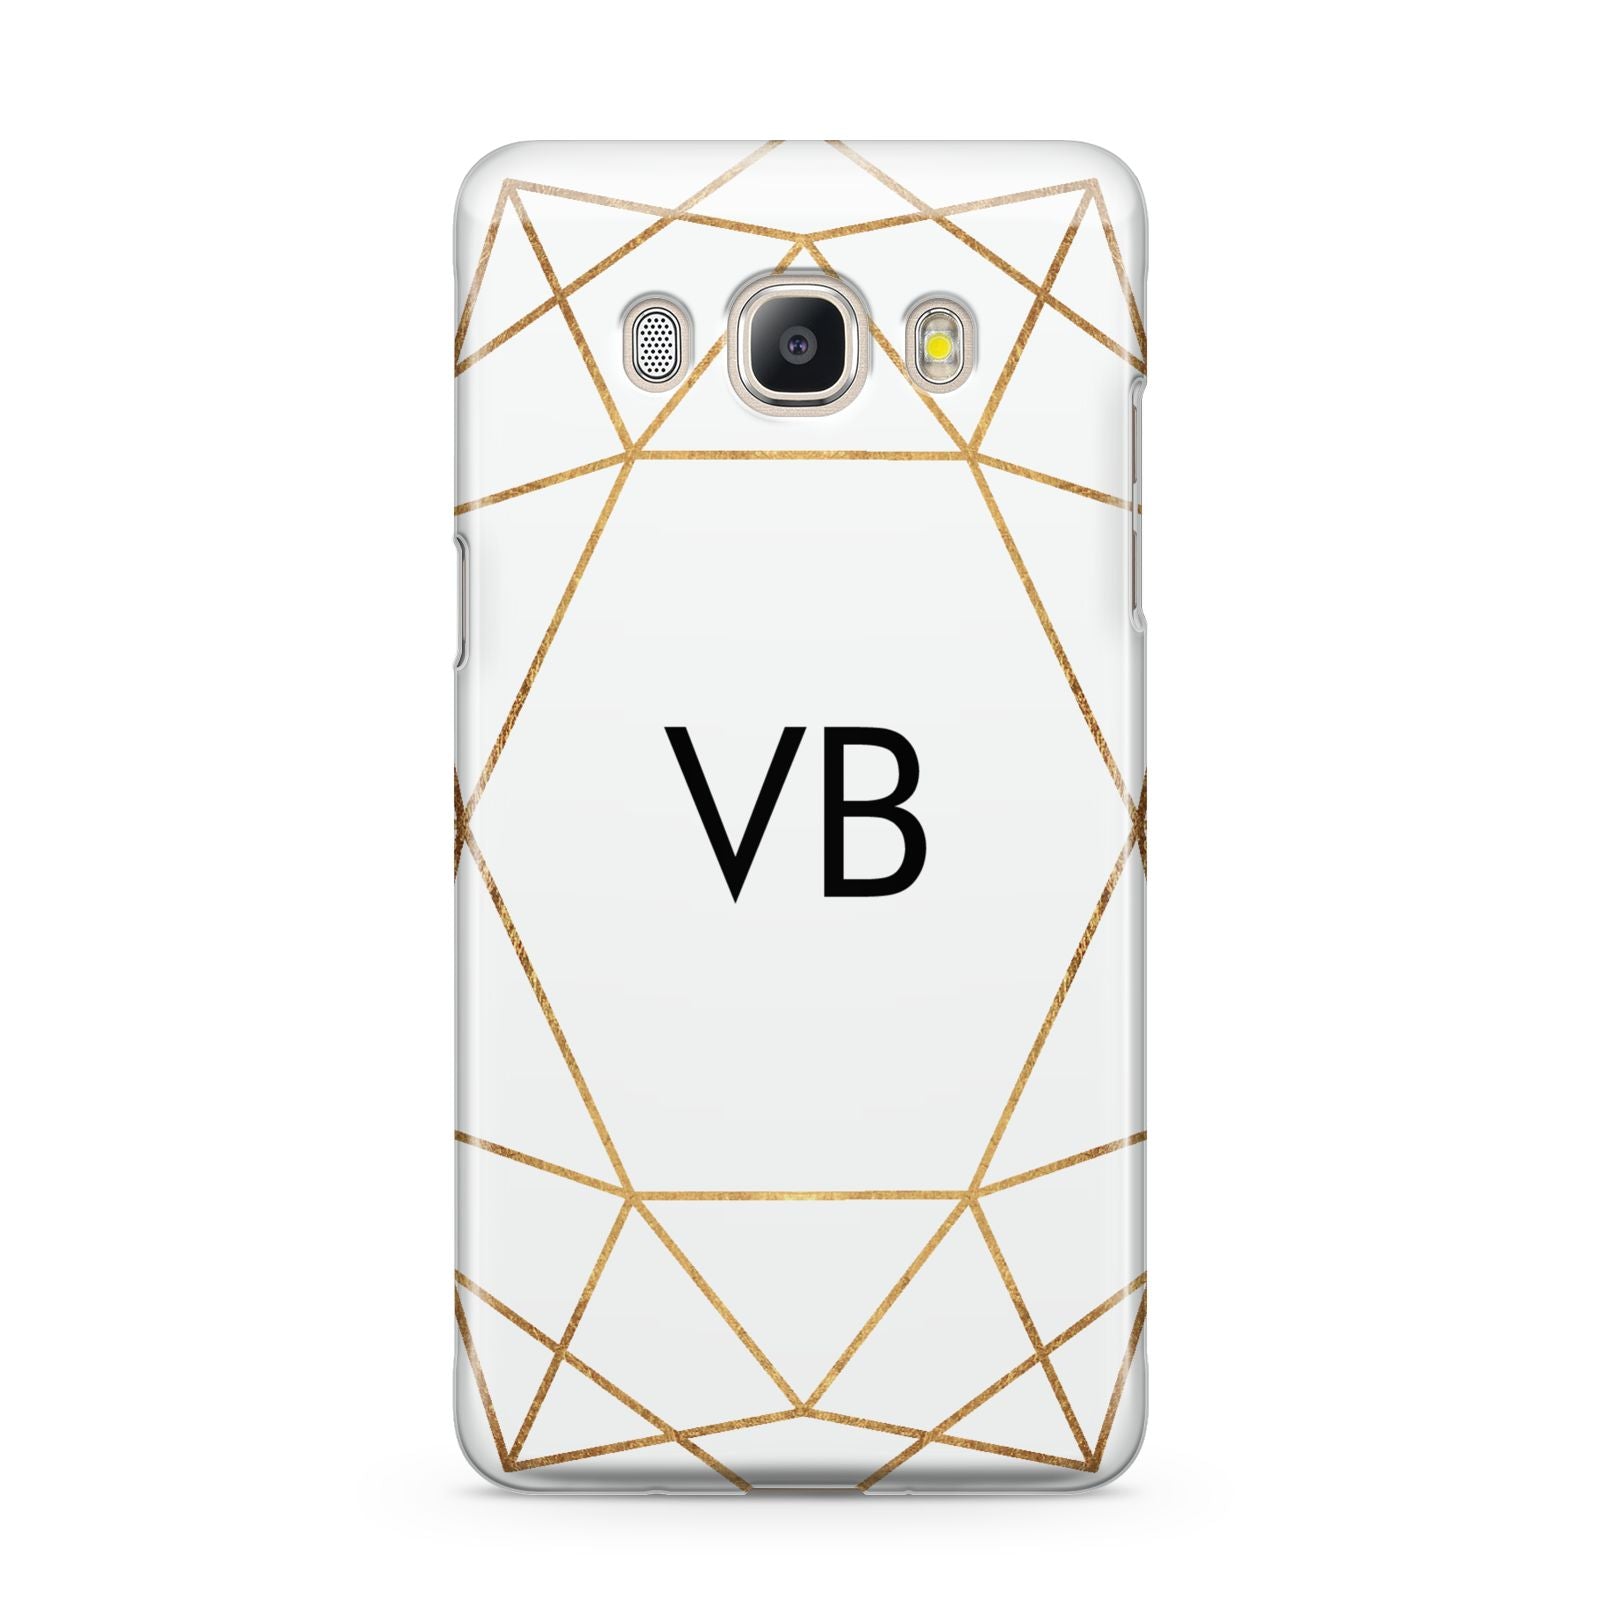 Personalised Initials White Gold Geometric Samsung Galaxy J5 2016 Case